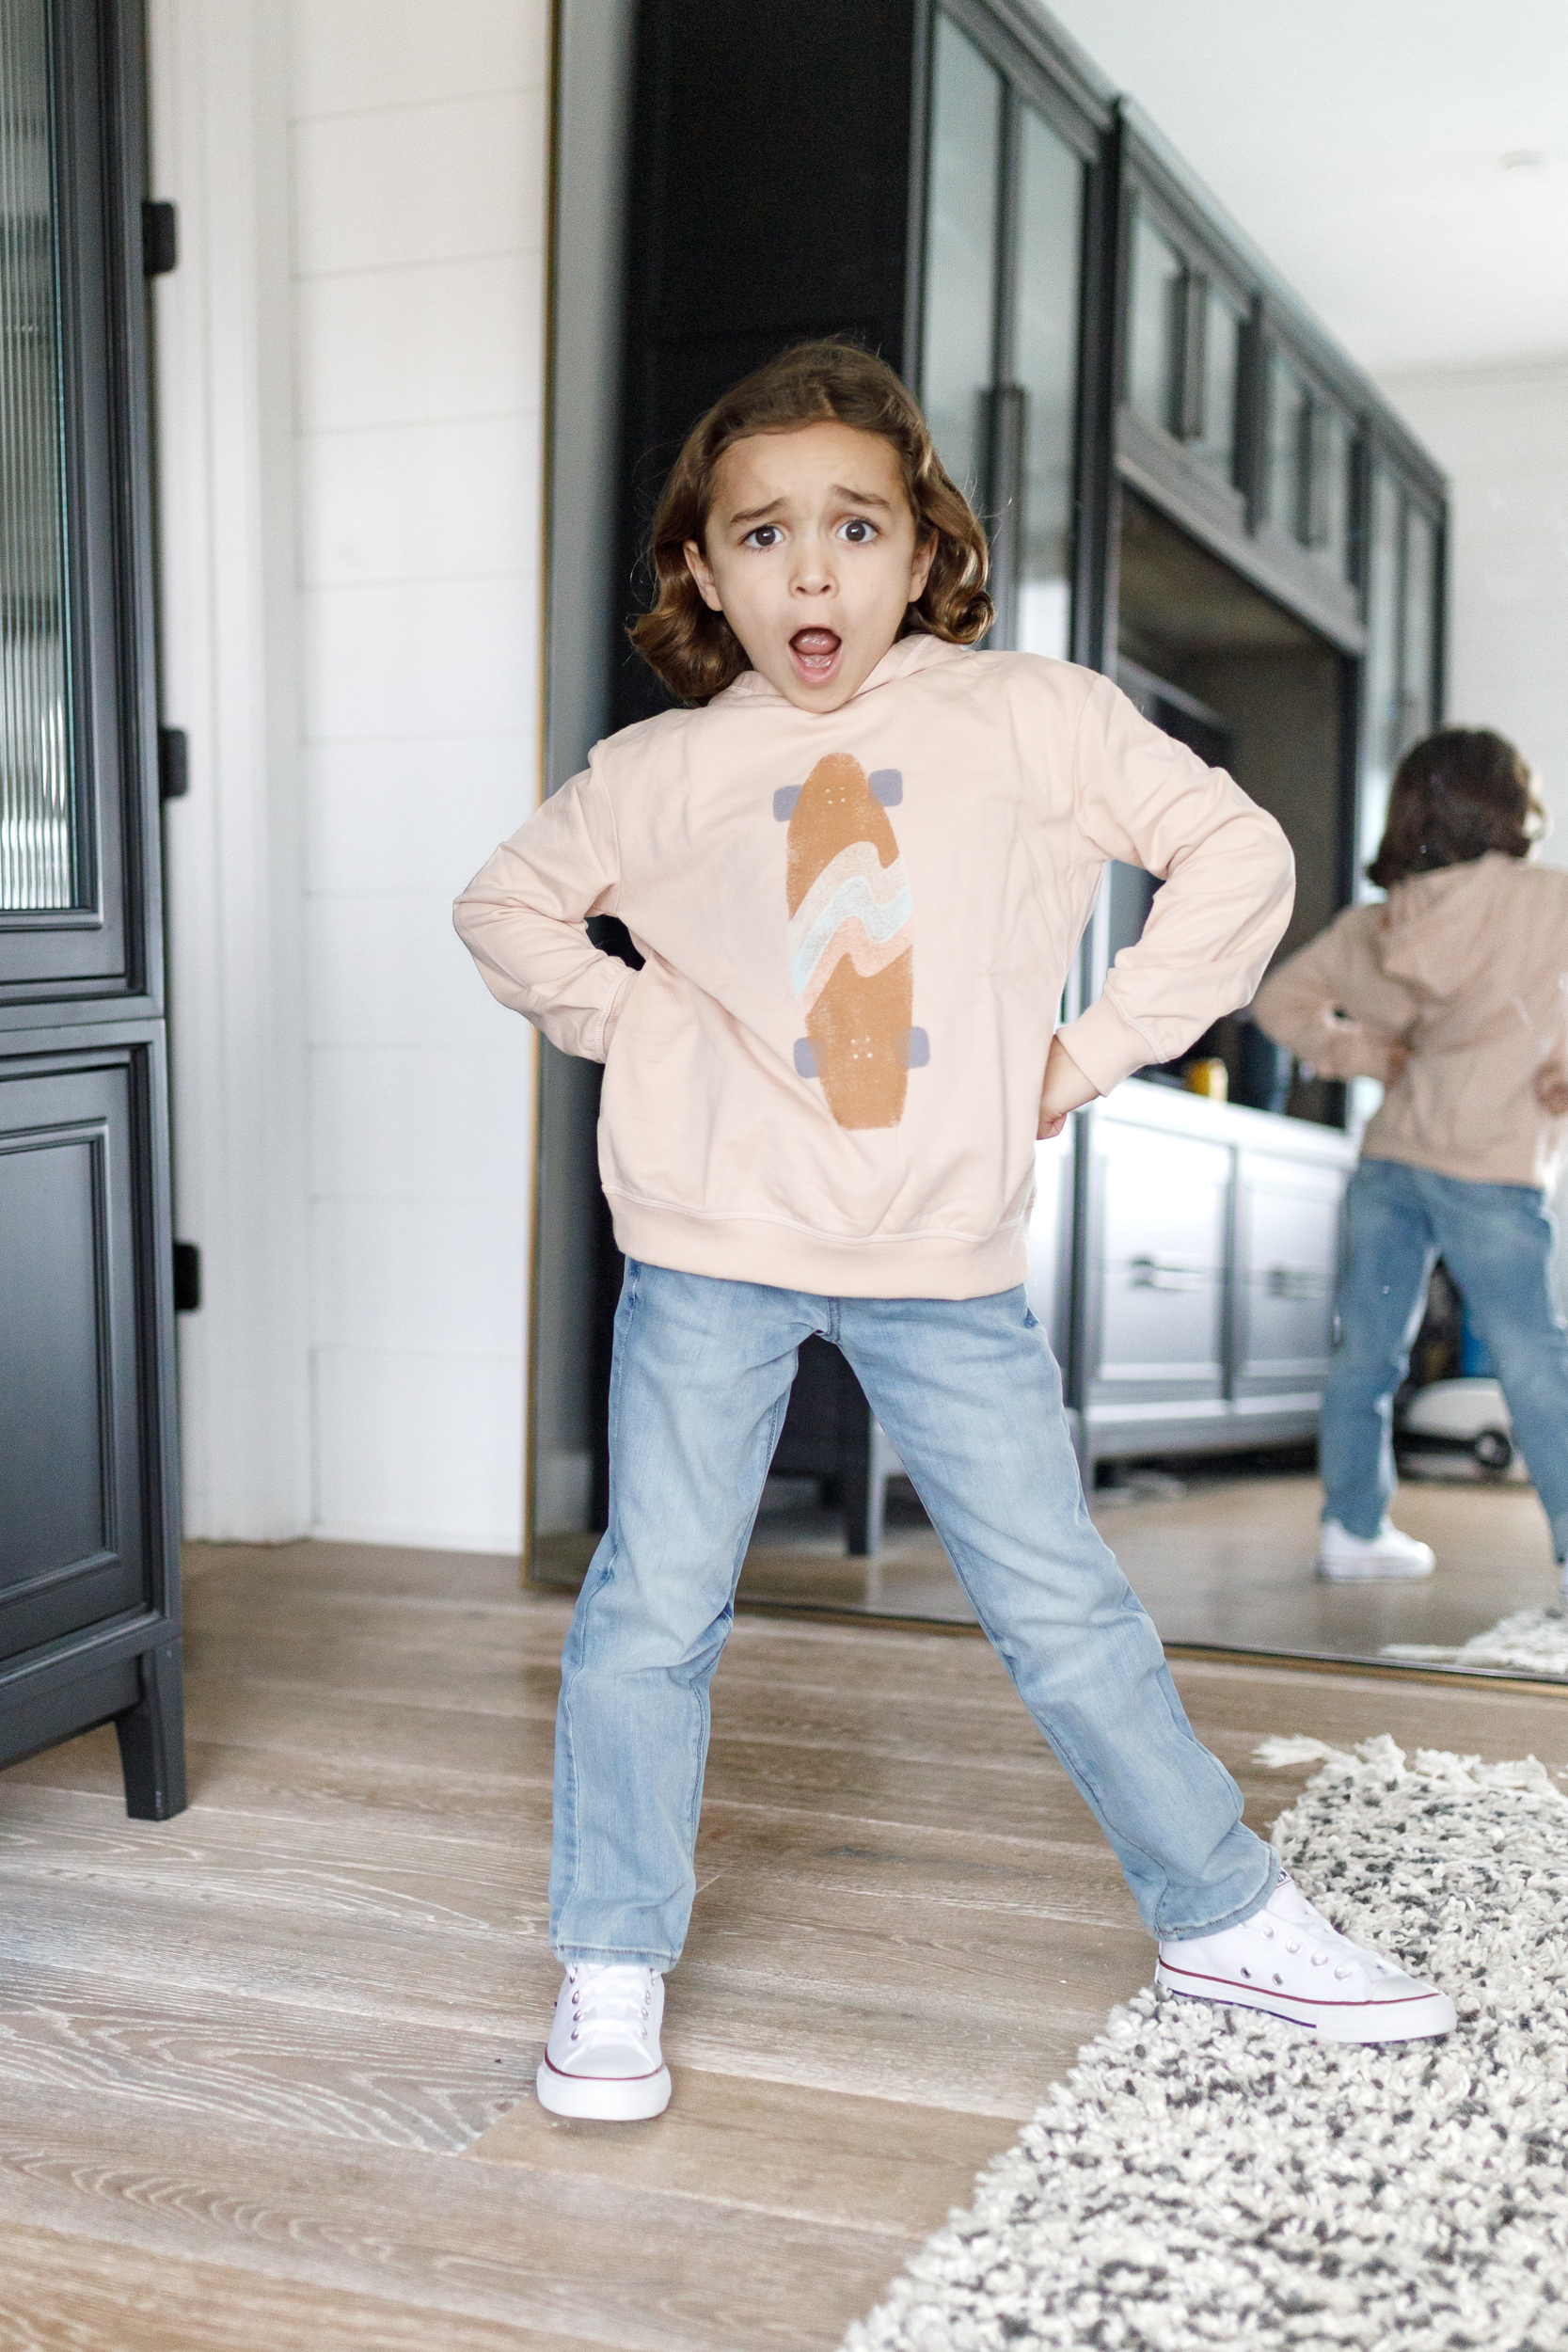 A boy strikes a fashionable pose in front of a mirror in a pink sweatshirt and jeans.